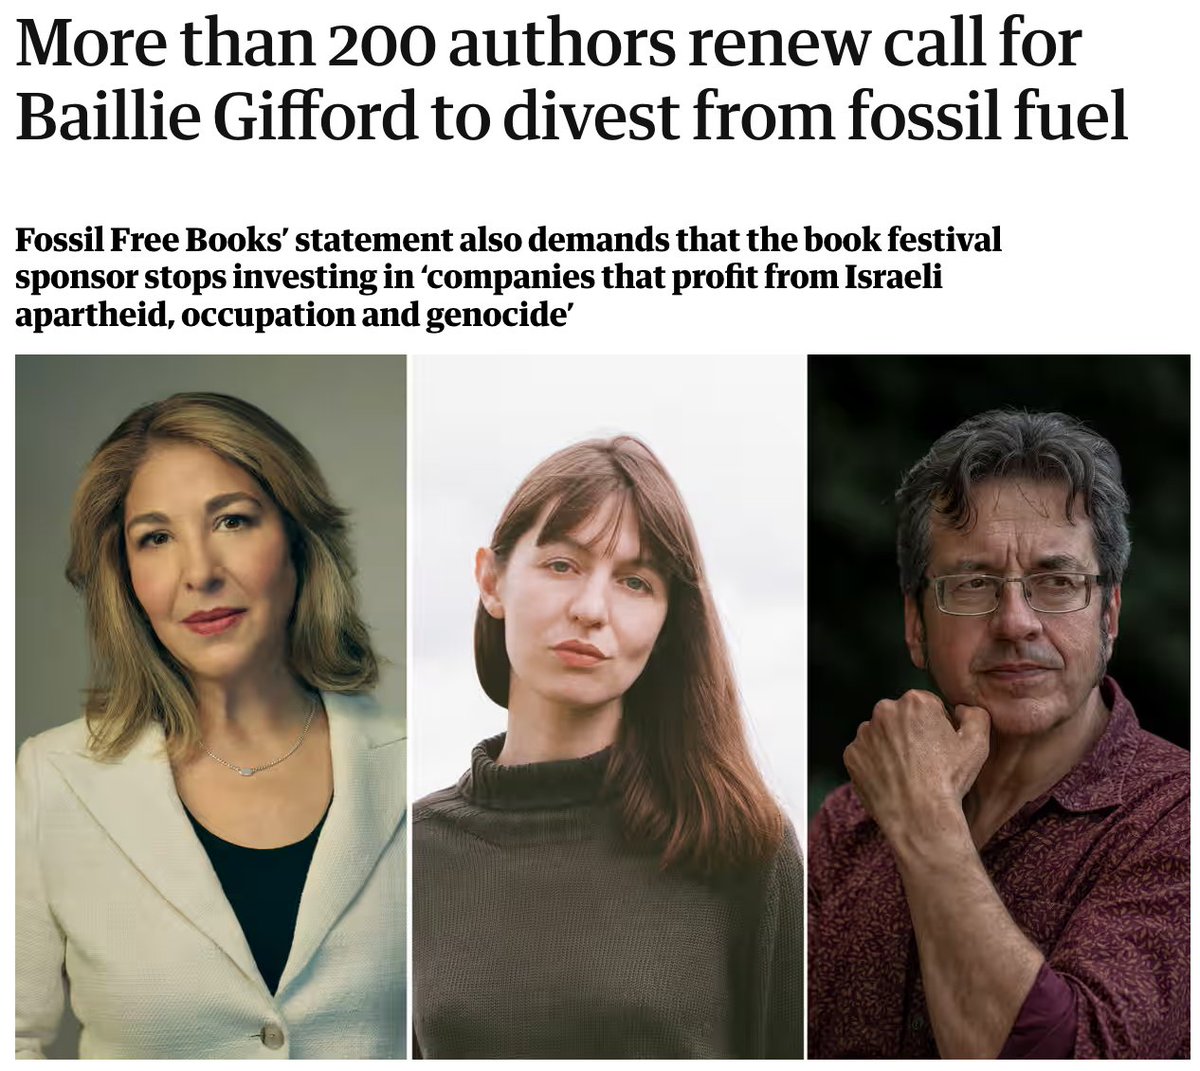 Now in the @GuardianBooks. Join @NaomiAKlein, @GeorgeMonbiot, @graceblakeley, @MaazaMengiste, @NatalieGDiaz, @RobGMacfarlane and Sally Rooney and sign our statement: ➡️docs.google.com/forms/d/e/1FAI… A genocide free, fossil free books industry is possible ✊📚🍉